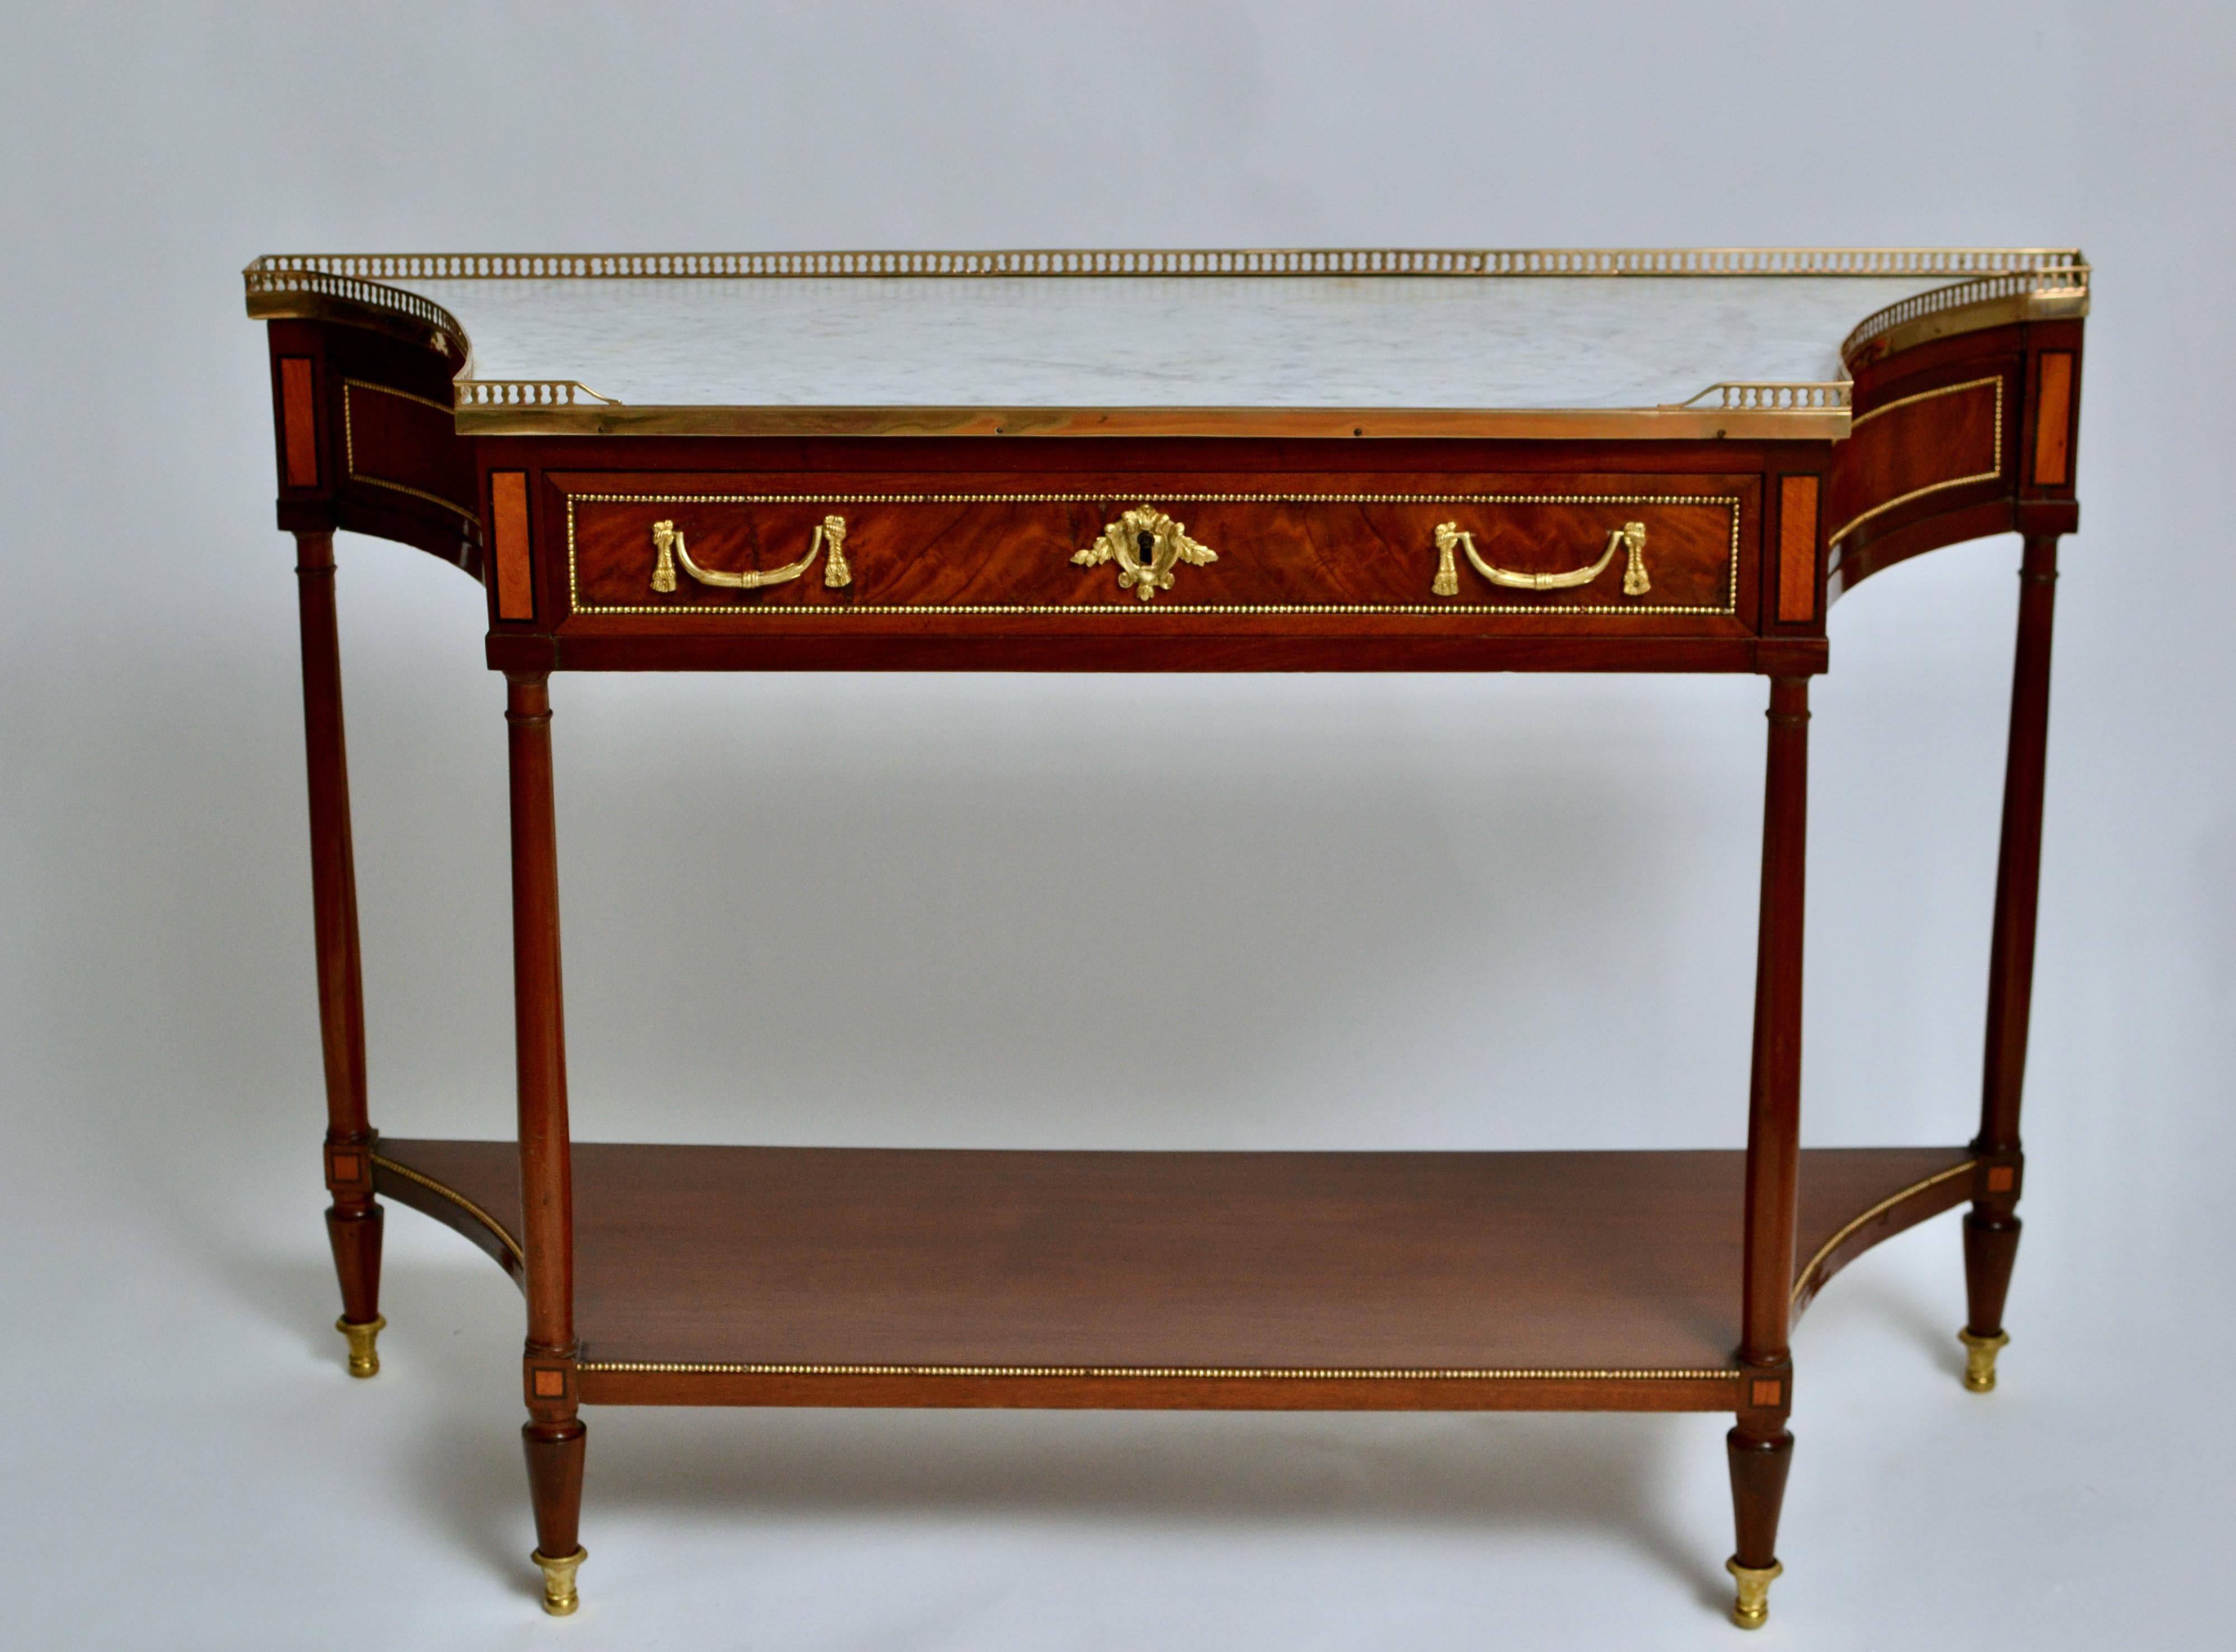 A fine Louis XVI gilt bronze mounted mahogany console desserte with a white marble top, 18th century.